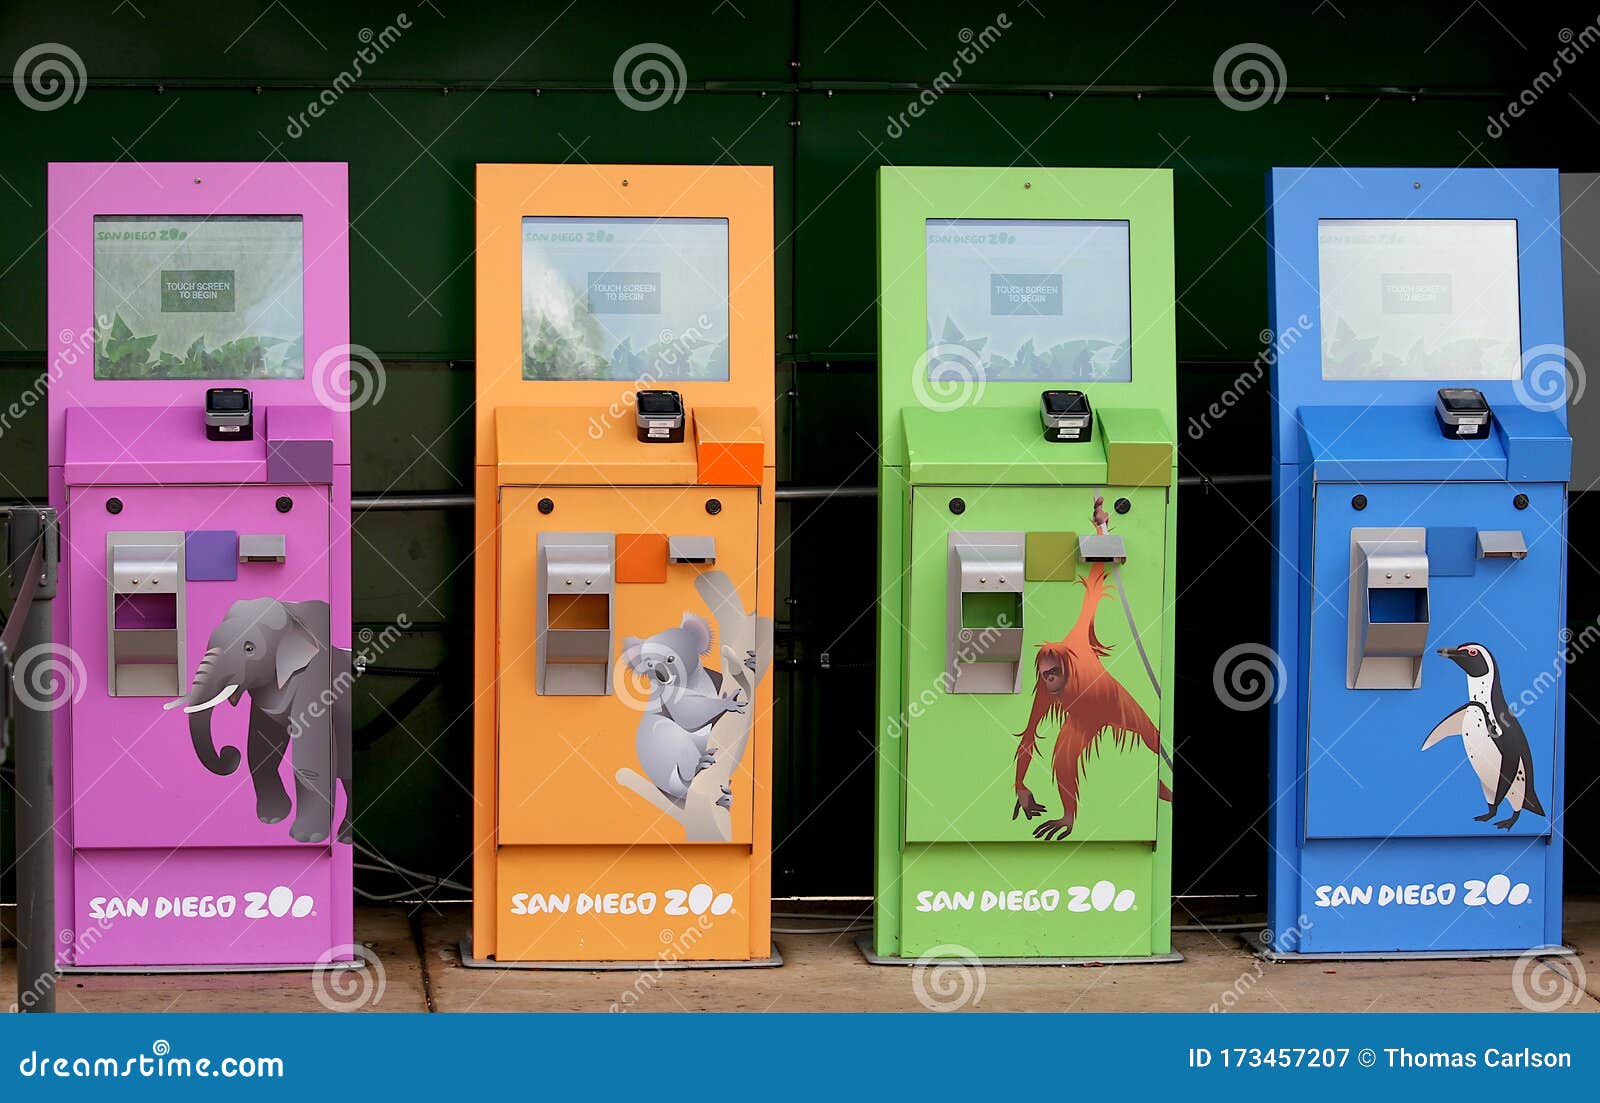 San Diego Zoo Ticket Booths Colorful Located Near Entrance To California Balboa Park Has More Than Animals 173457207 